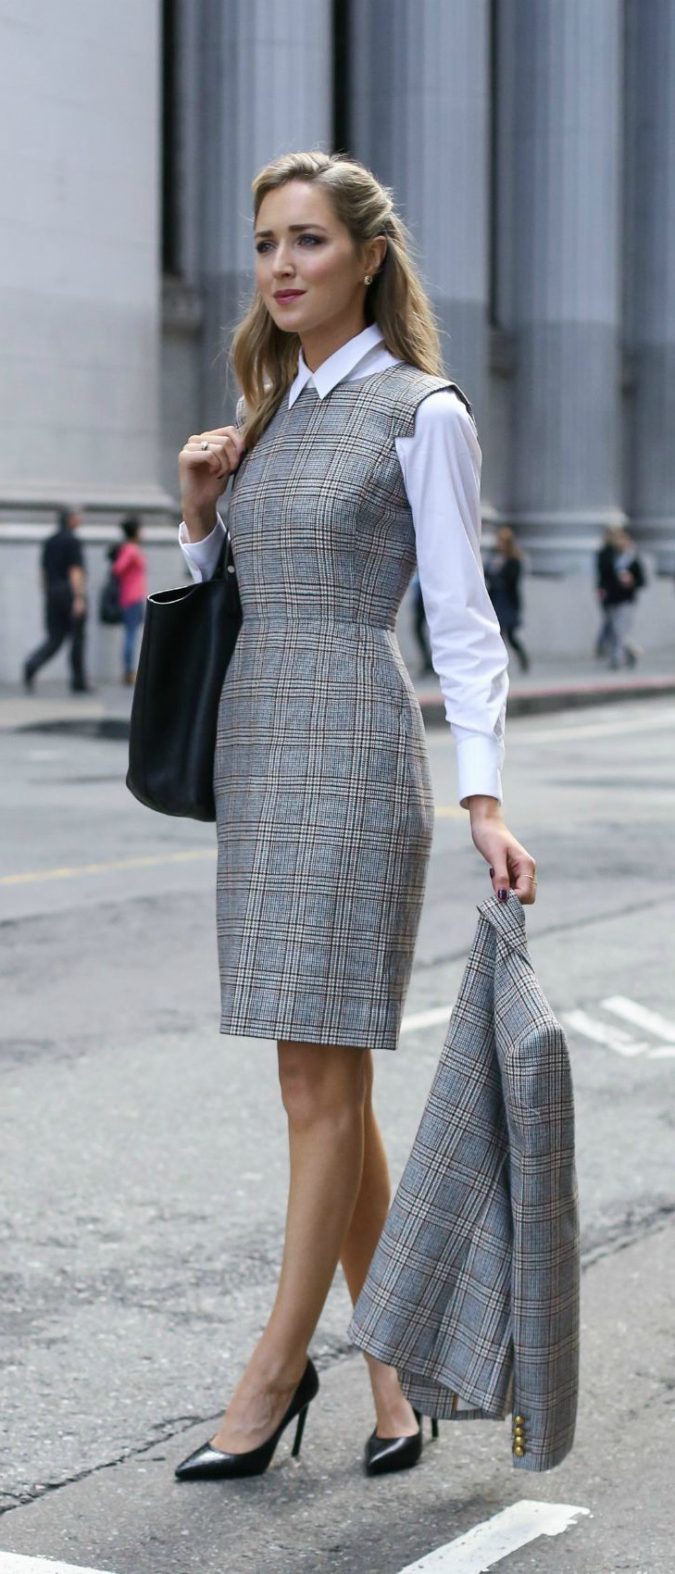 The Grey Dress. e1597876664646 60+ Job Interview Outfit Ideas for Women - 7